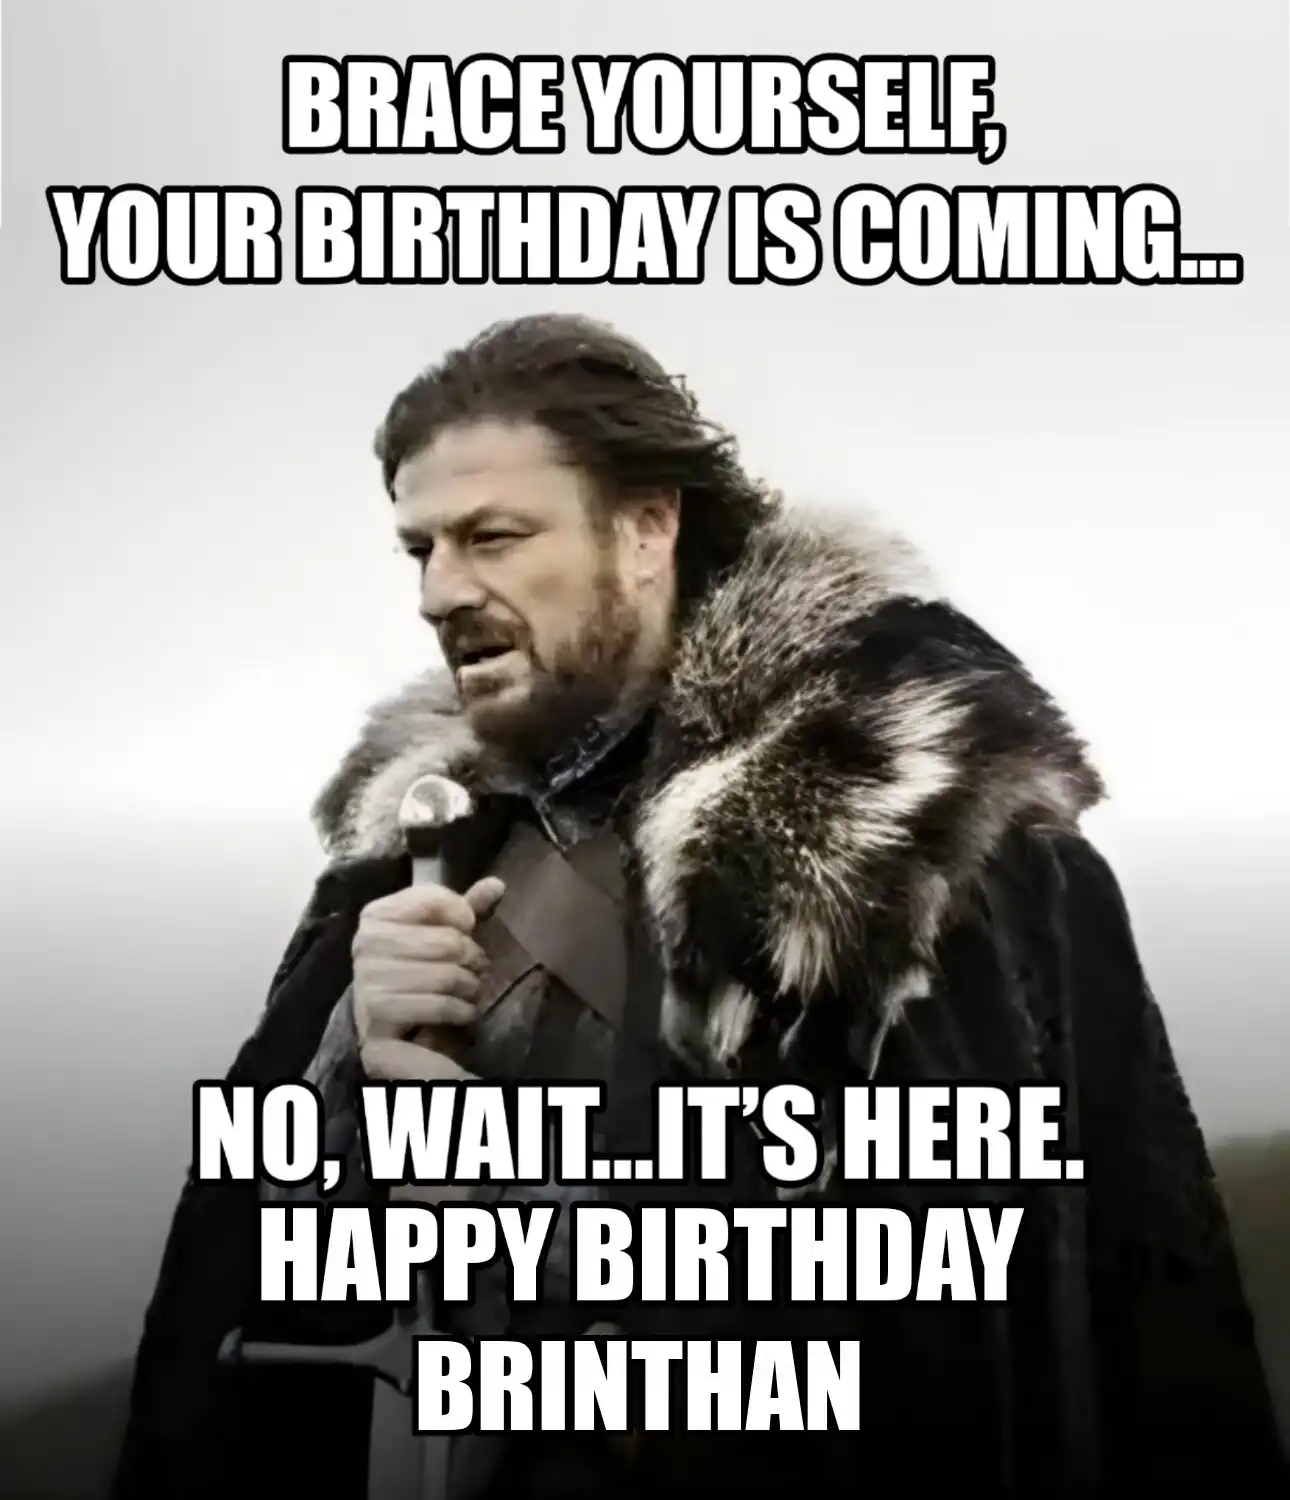 Happy Birthday Brinthan Brace Yourself Your Birthday Is Coming Meme